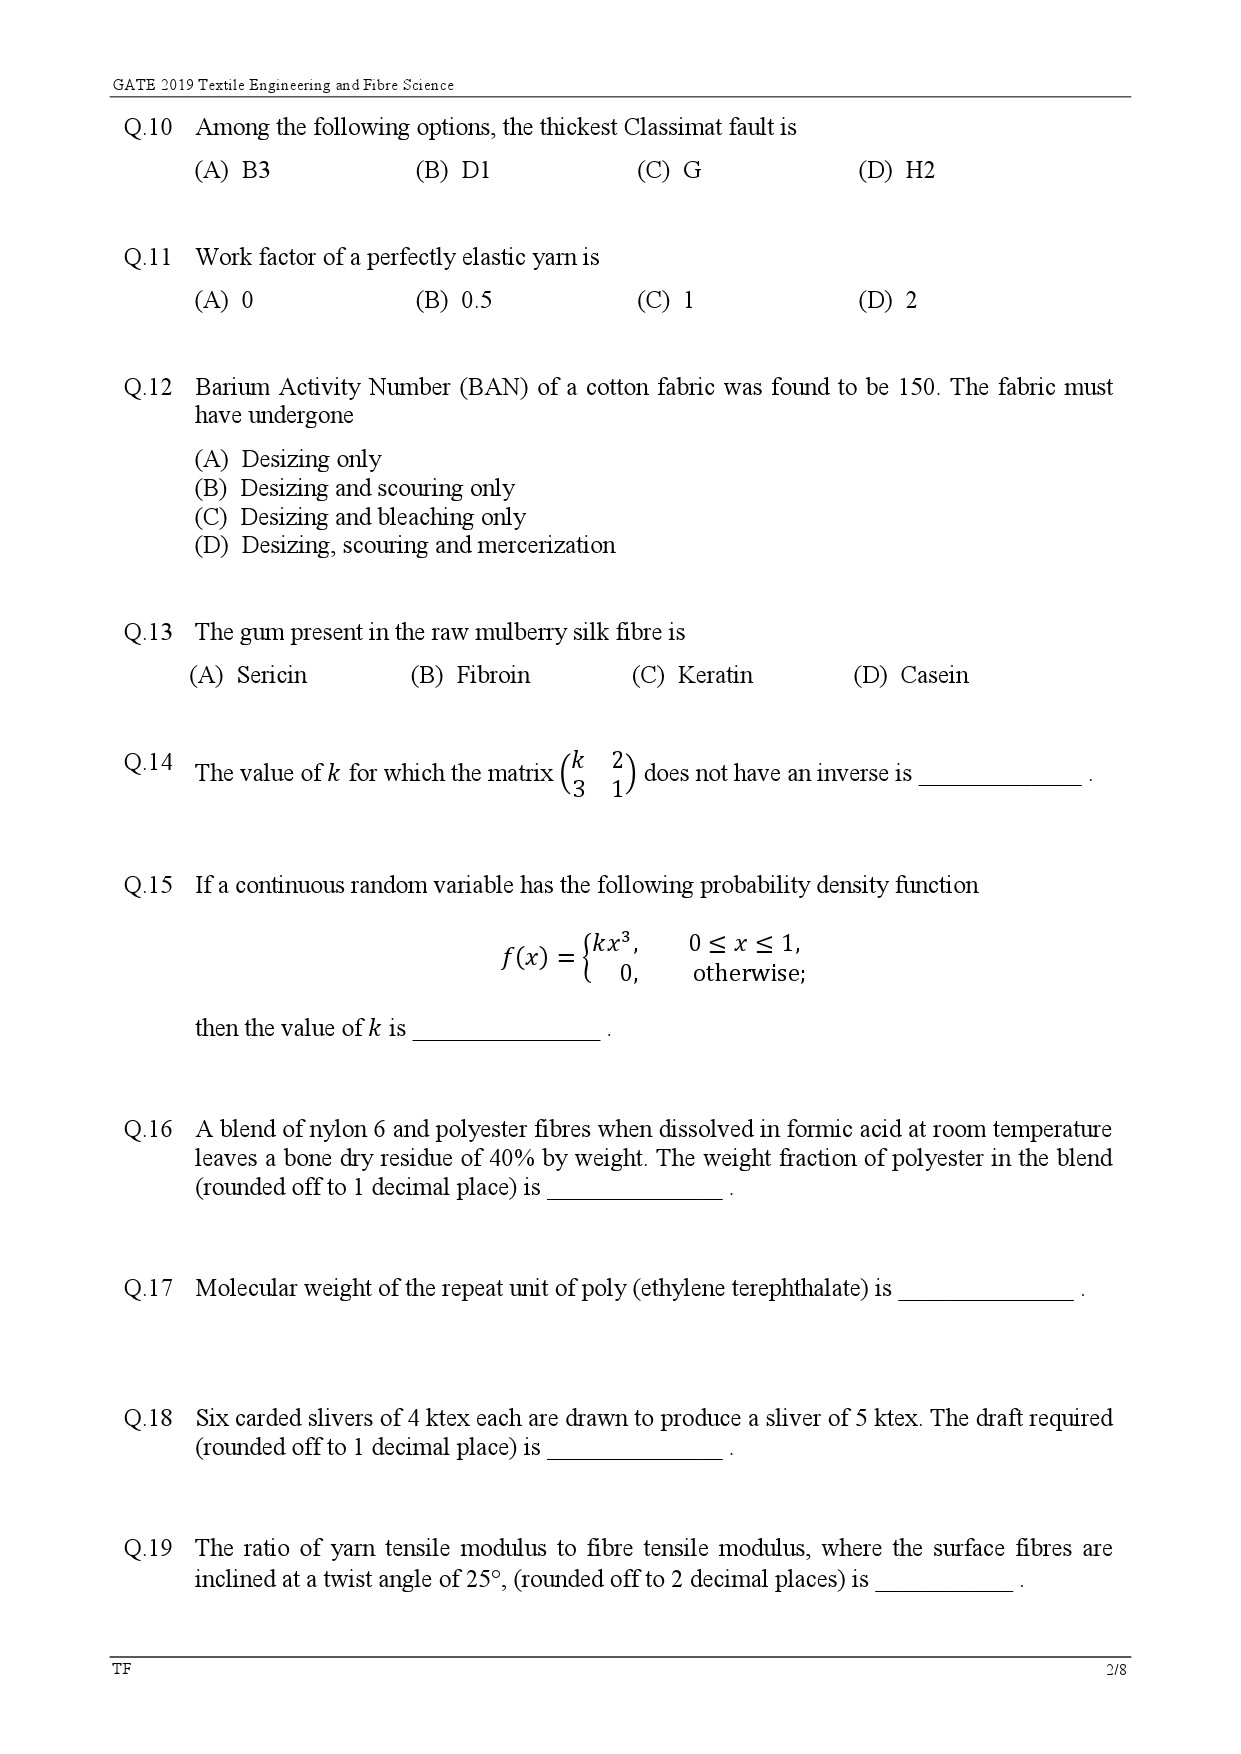 GATE Exam Question Paper 2019 Textile Engineering and Fibre Science 5